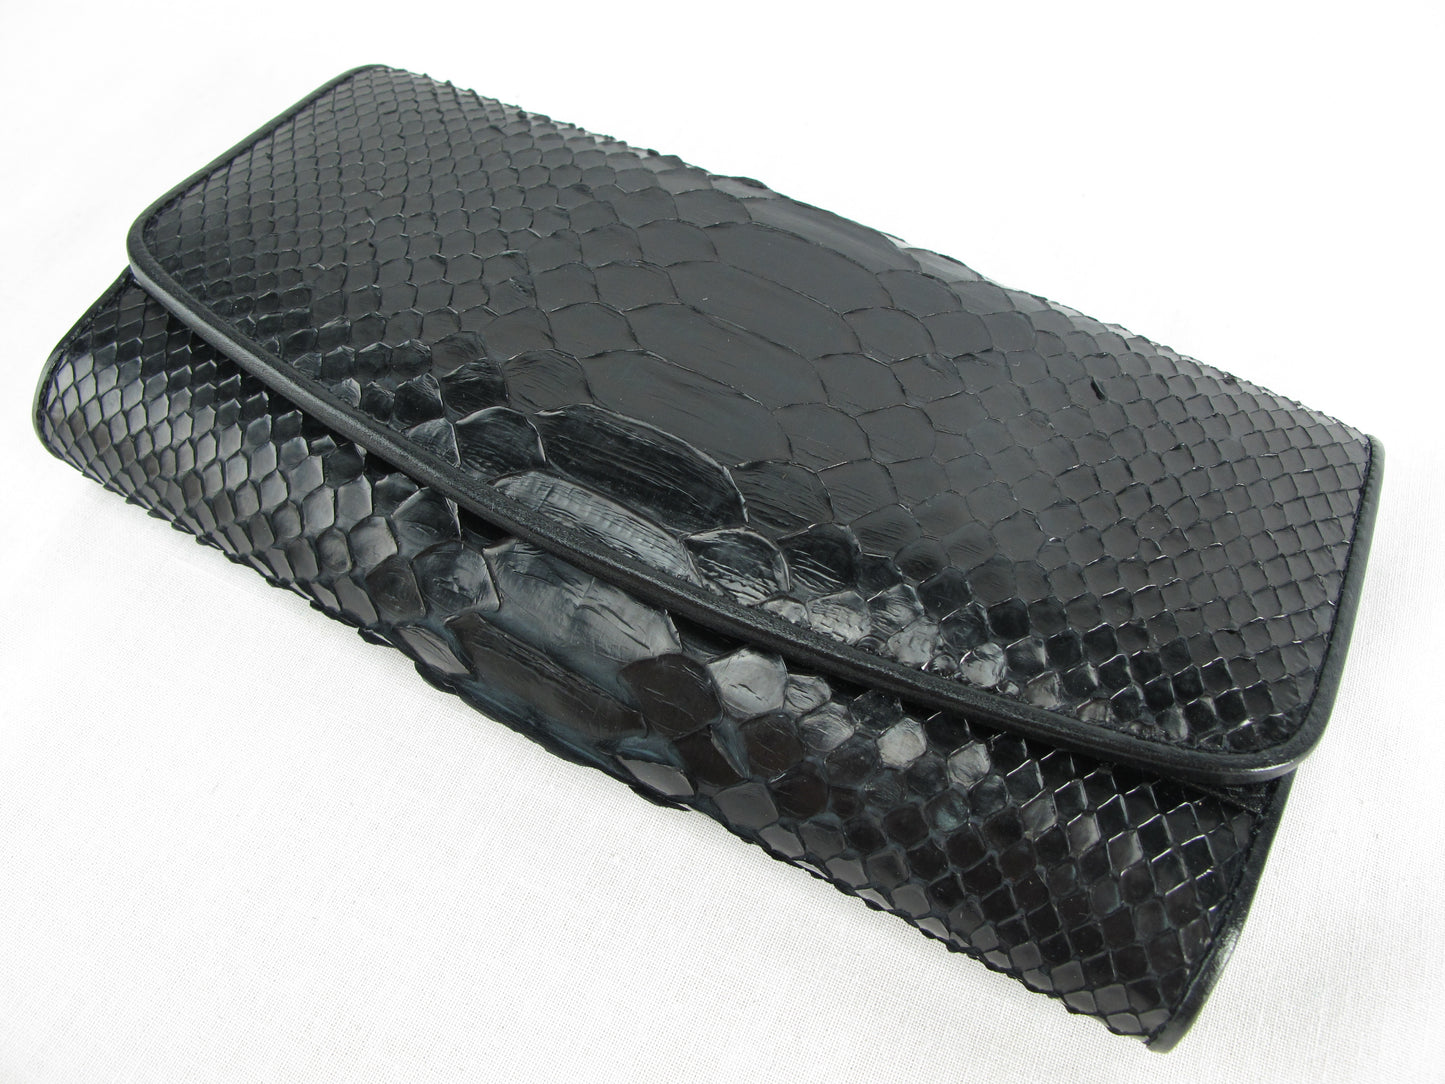 Genuine Python Snake Belly Skin Leather Women's Trifold Clutch Wallet Purse